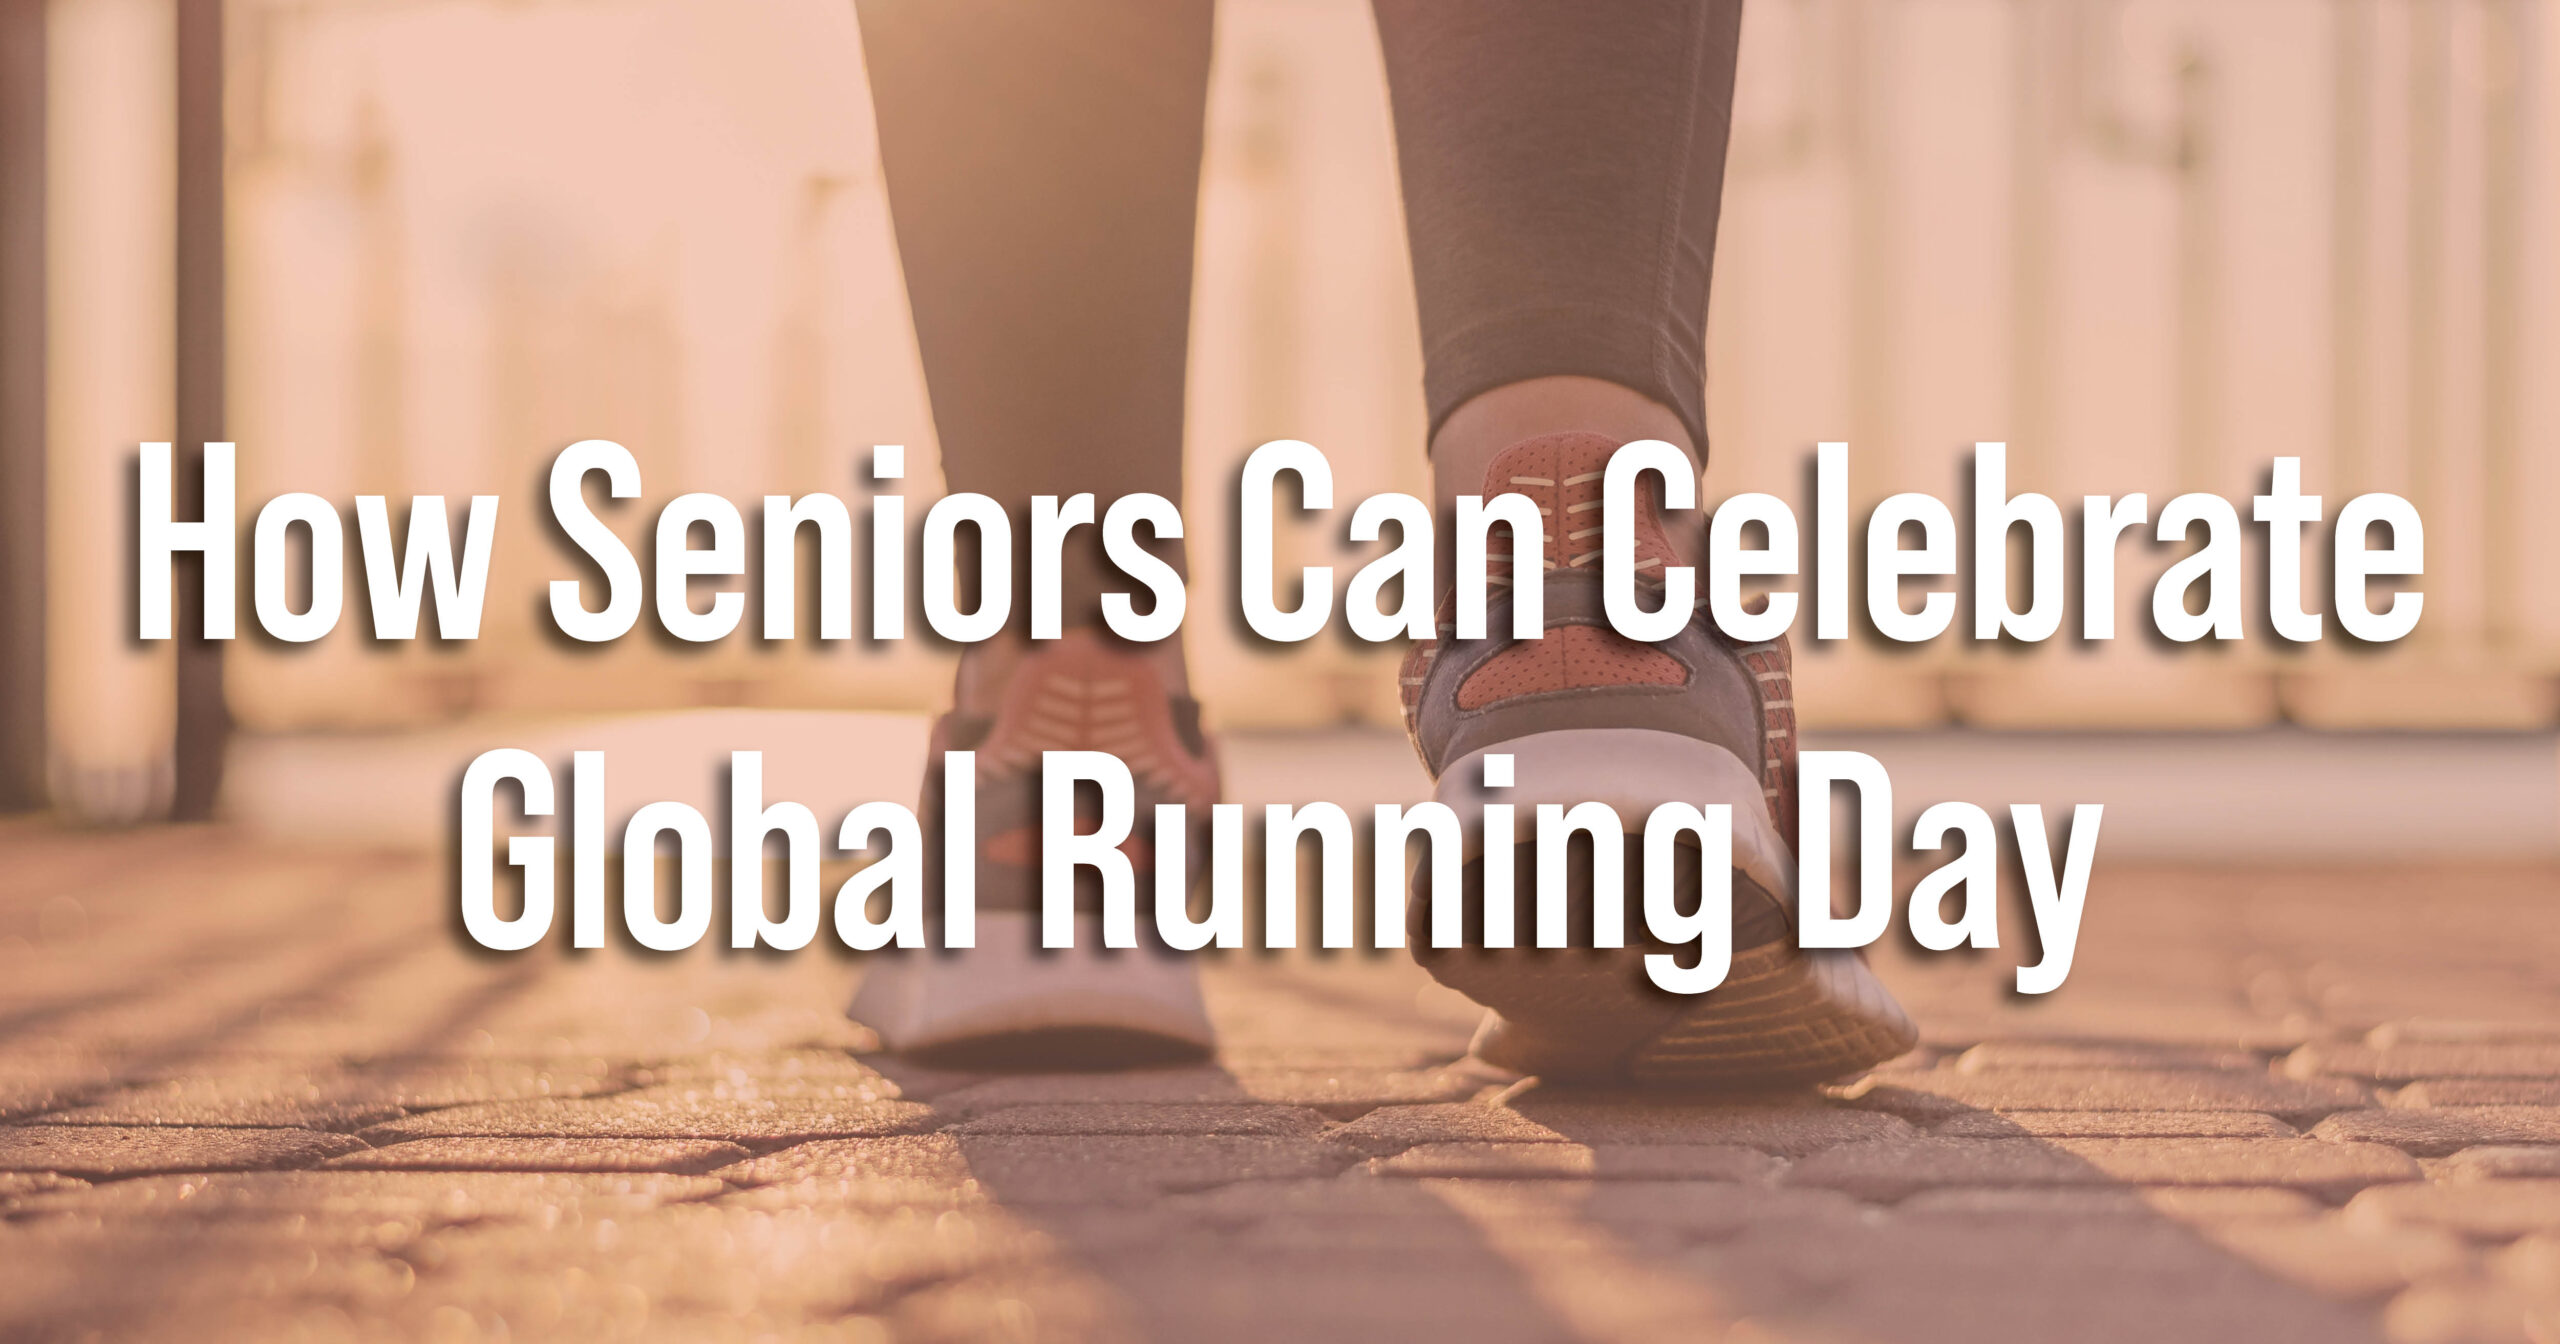 How Seniors Can Celebrate Global Running Day